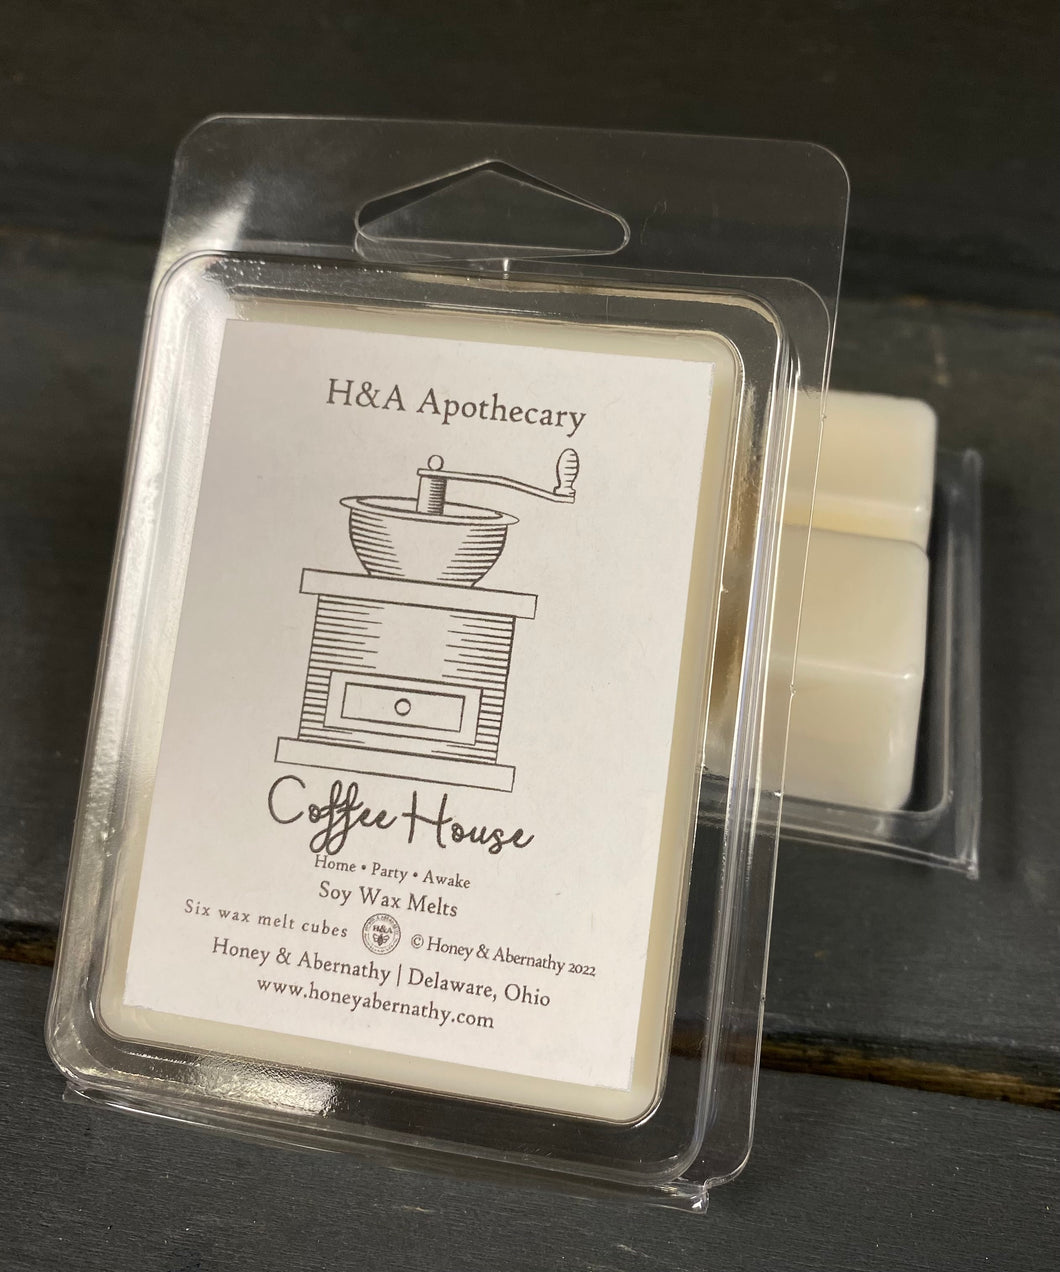 H&A Apothecary Coffee House Soy Wax Melt